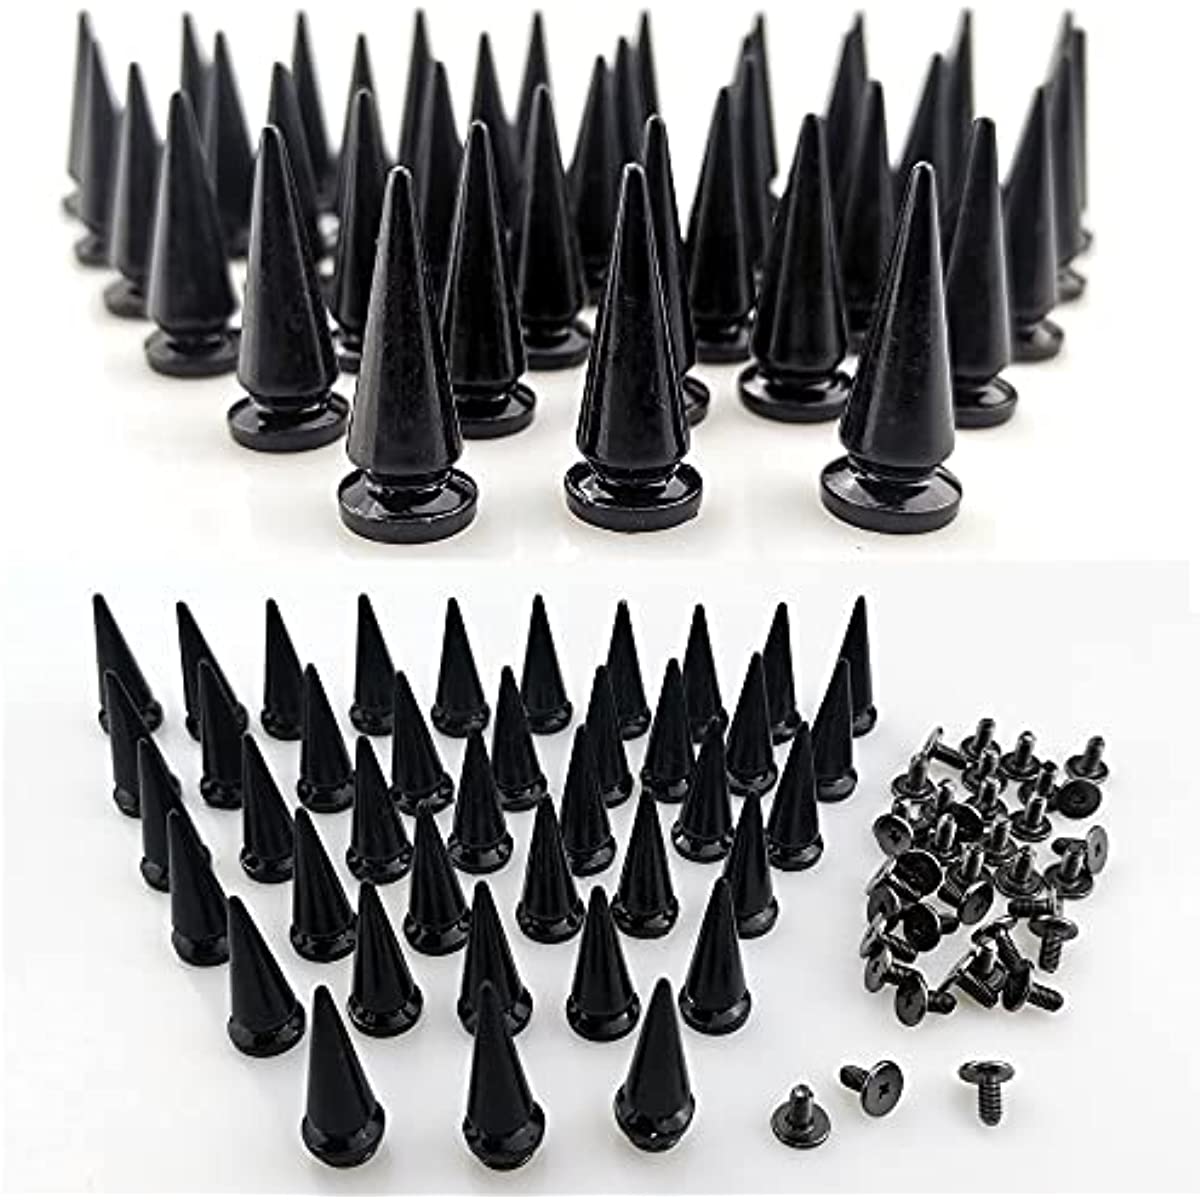  Bastex 205pcs Studs and Spikes. Metal Spikes and Punk Studs for  Clothing, Jacket Studs. Cone Small Metal Studs and Metal Spikes for DIY  Leather Craft. Includes Bullet Cone Spike and Metal